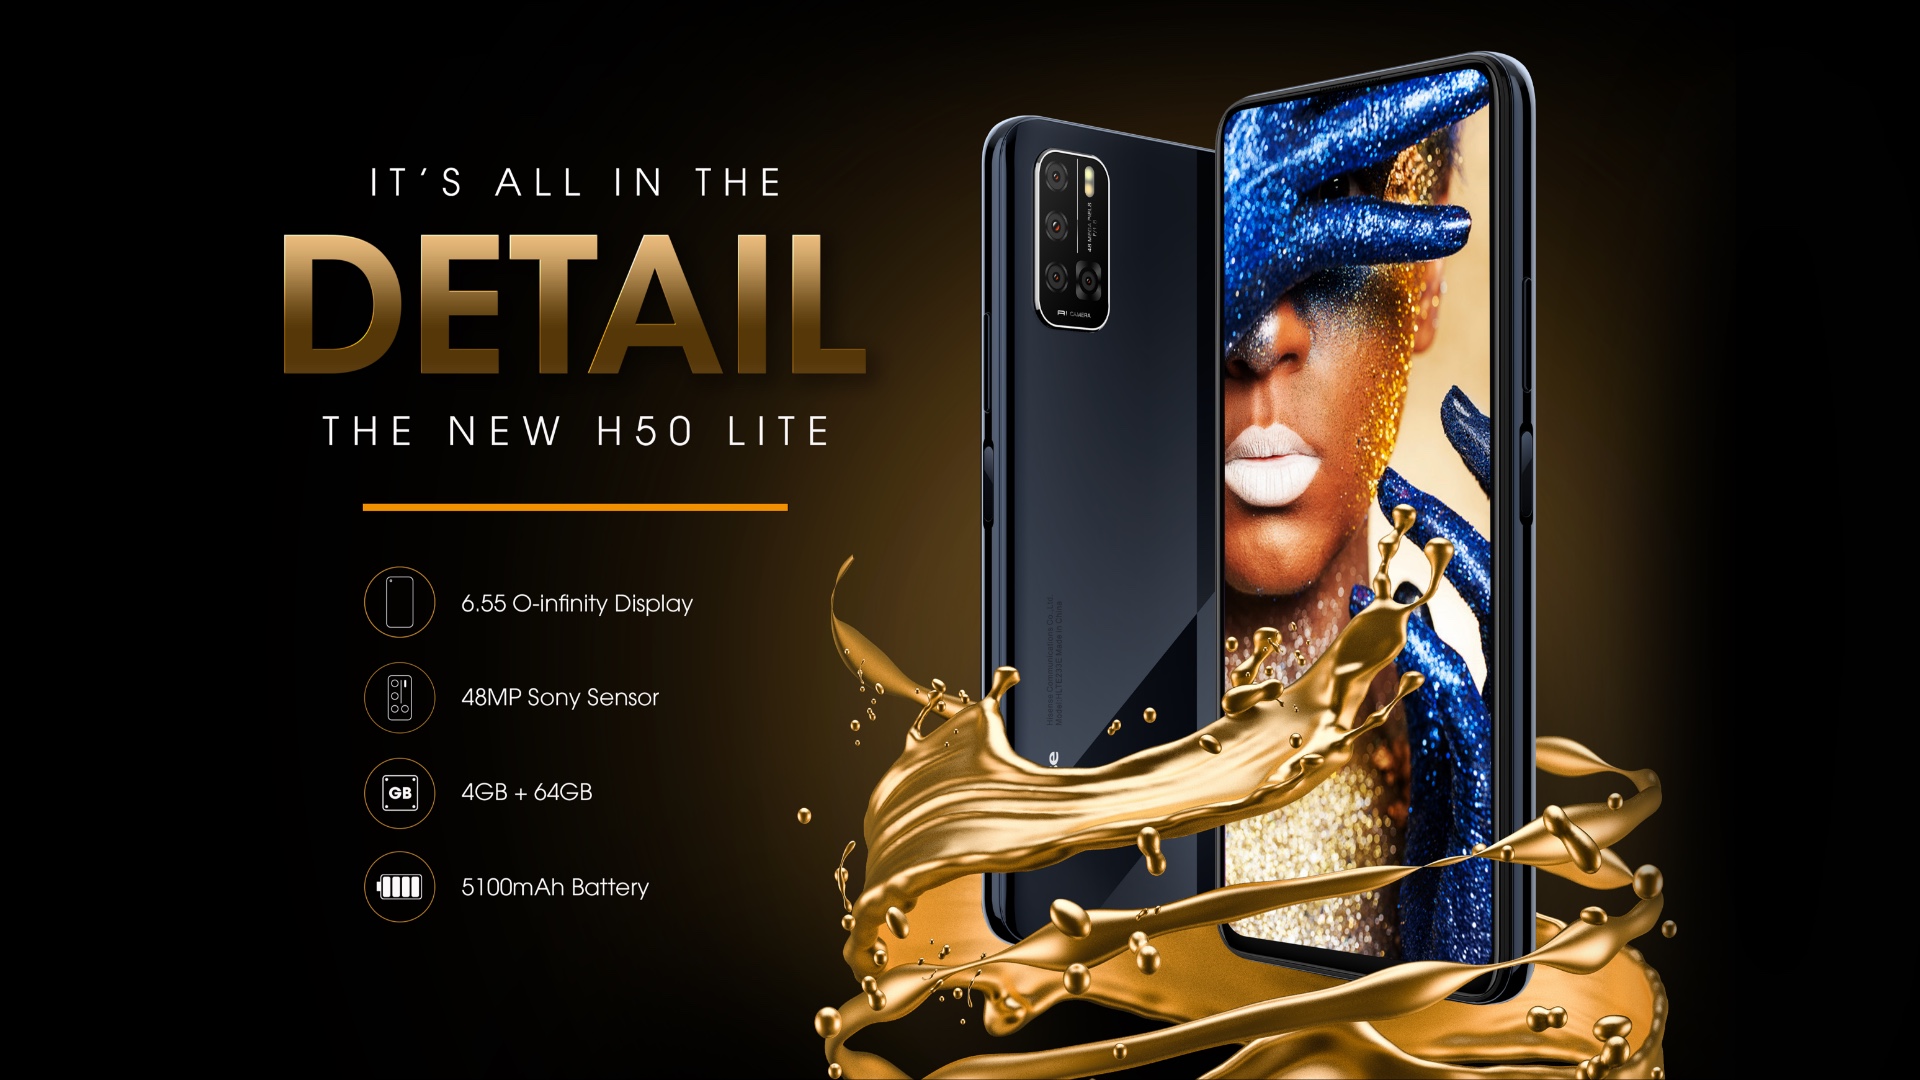 Hisense H50 Lite - It's All in the Detail - The New H50 Lite